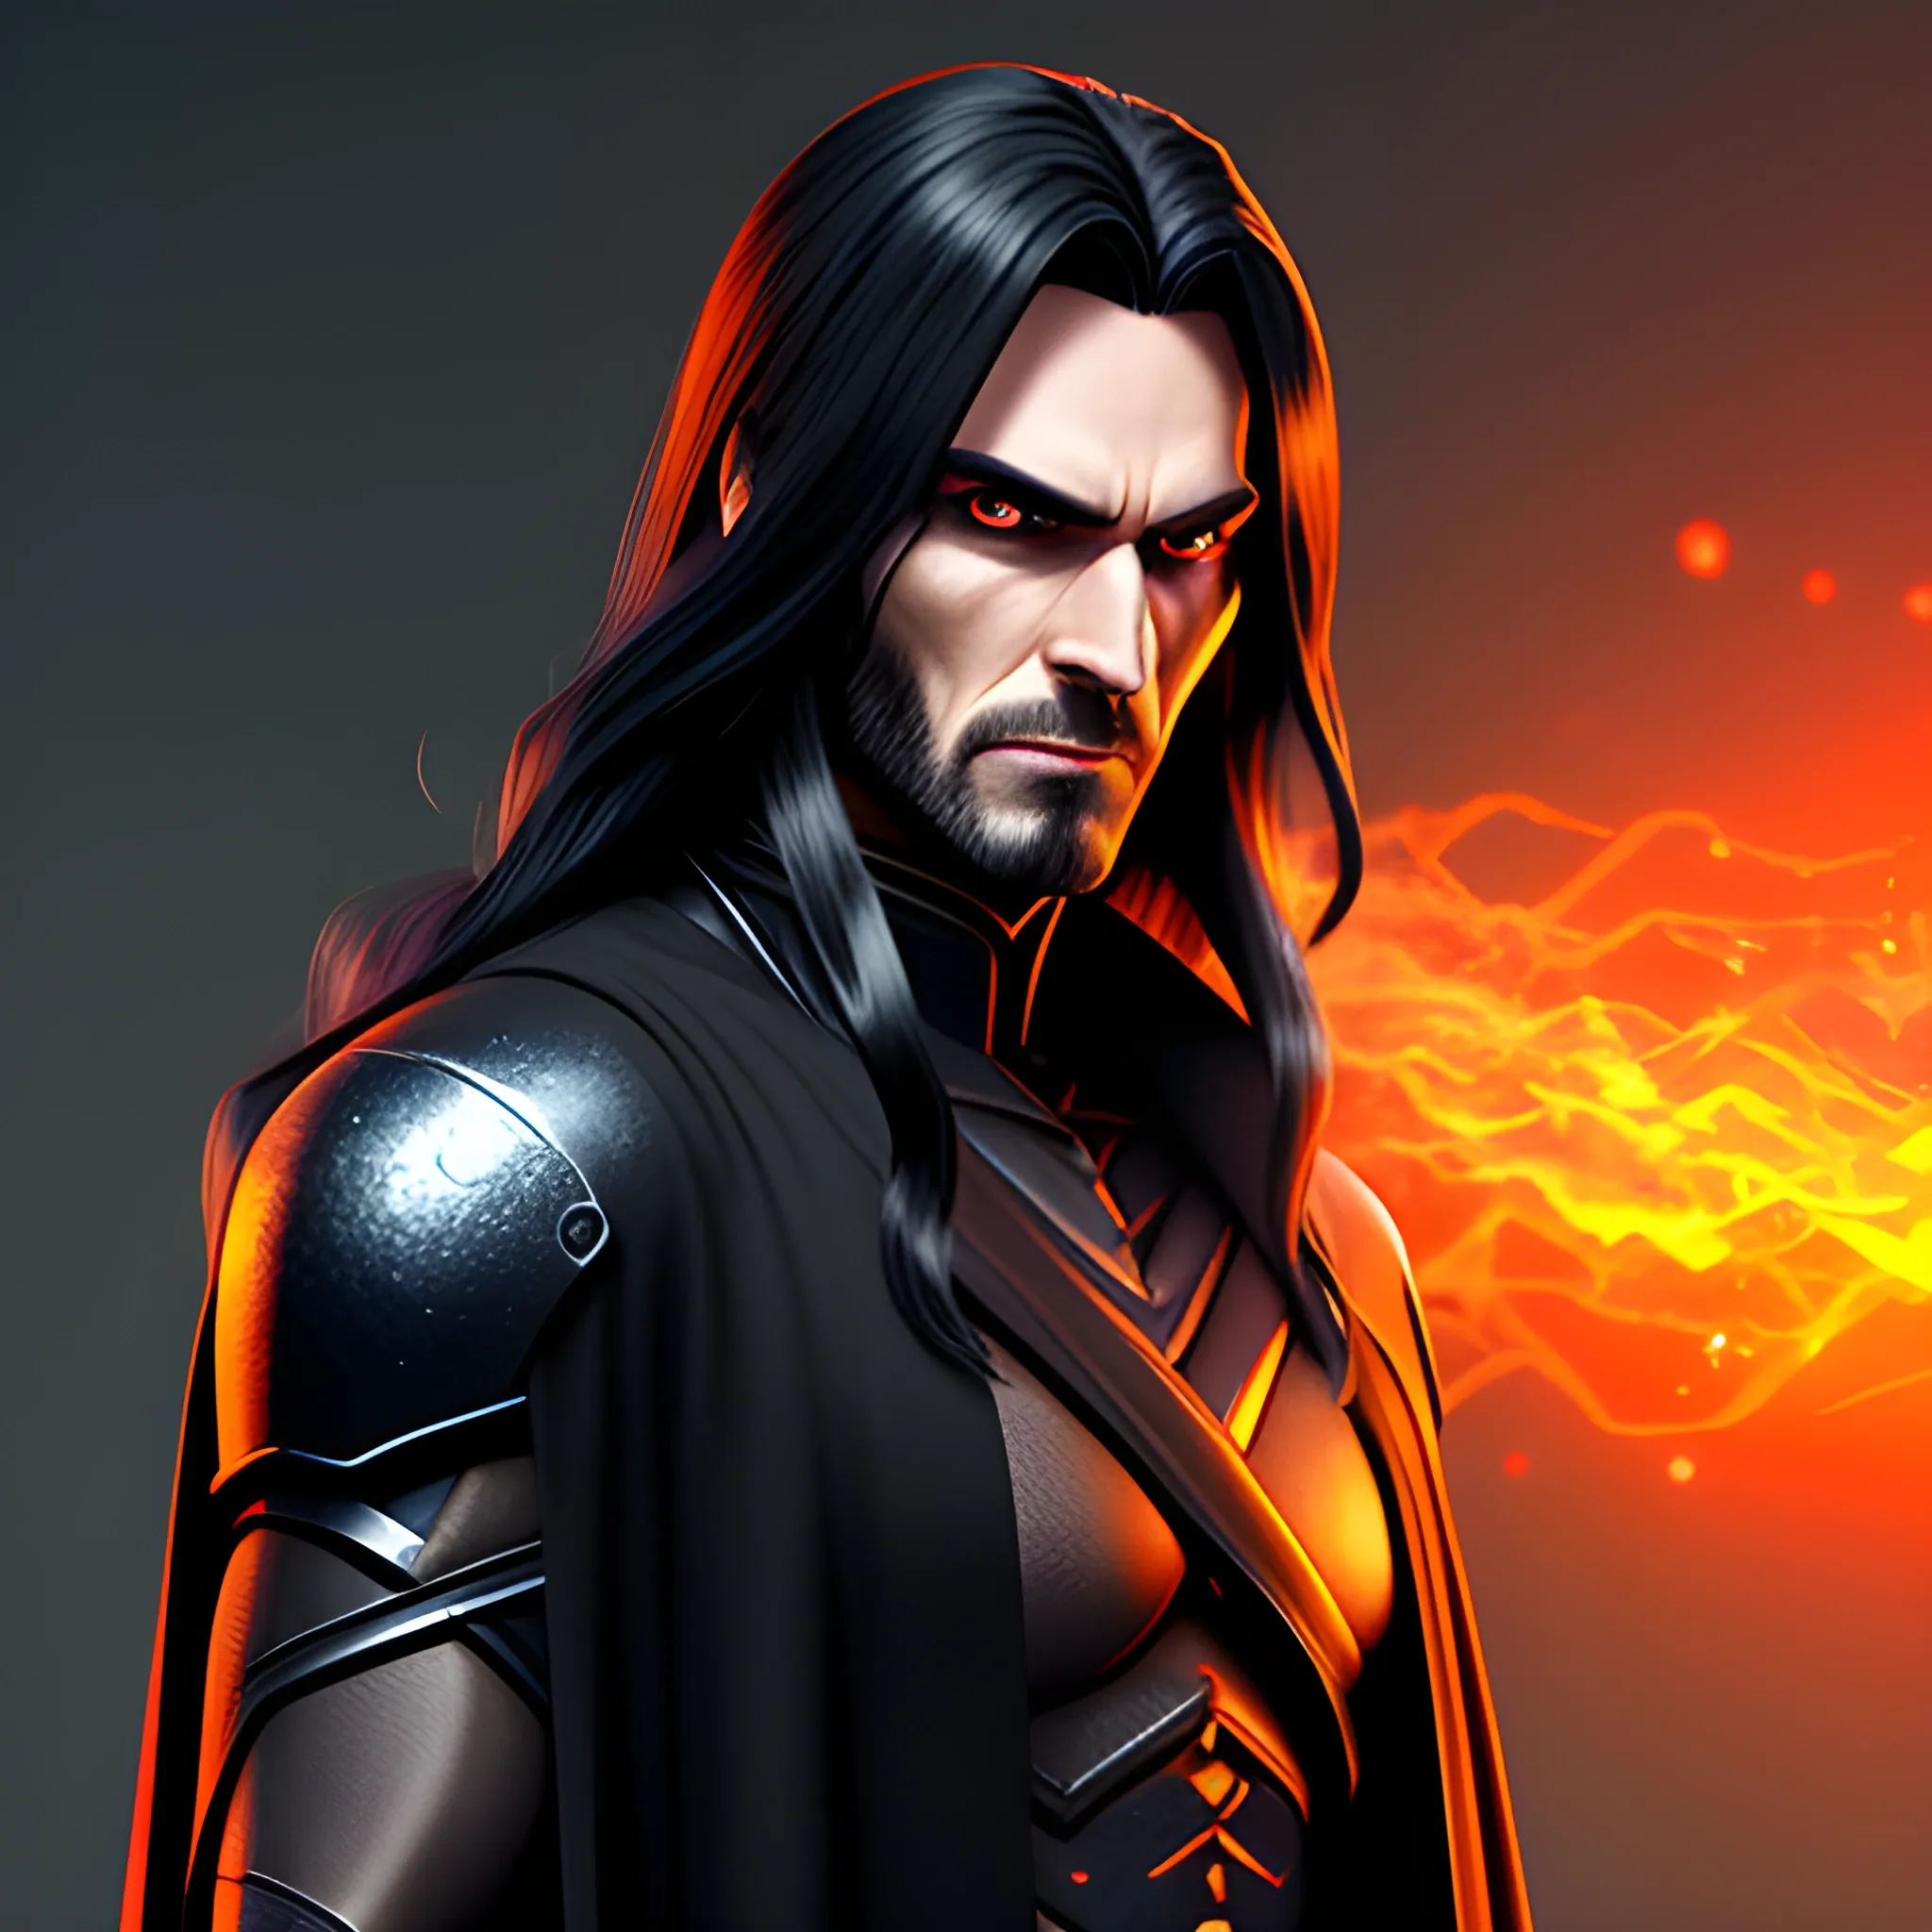 Anime boy with long dark hair and dark clothes and cape, 3D, realistic, post-apocalyptic smoky orange gradient background